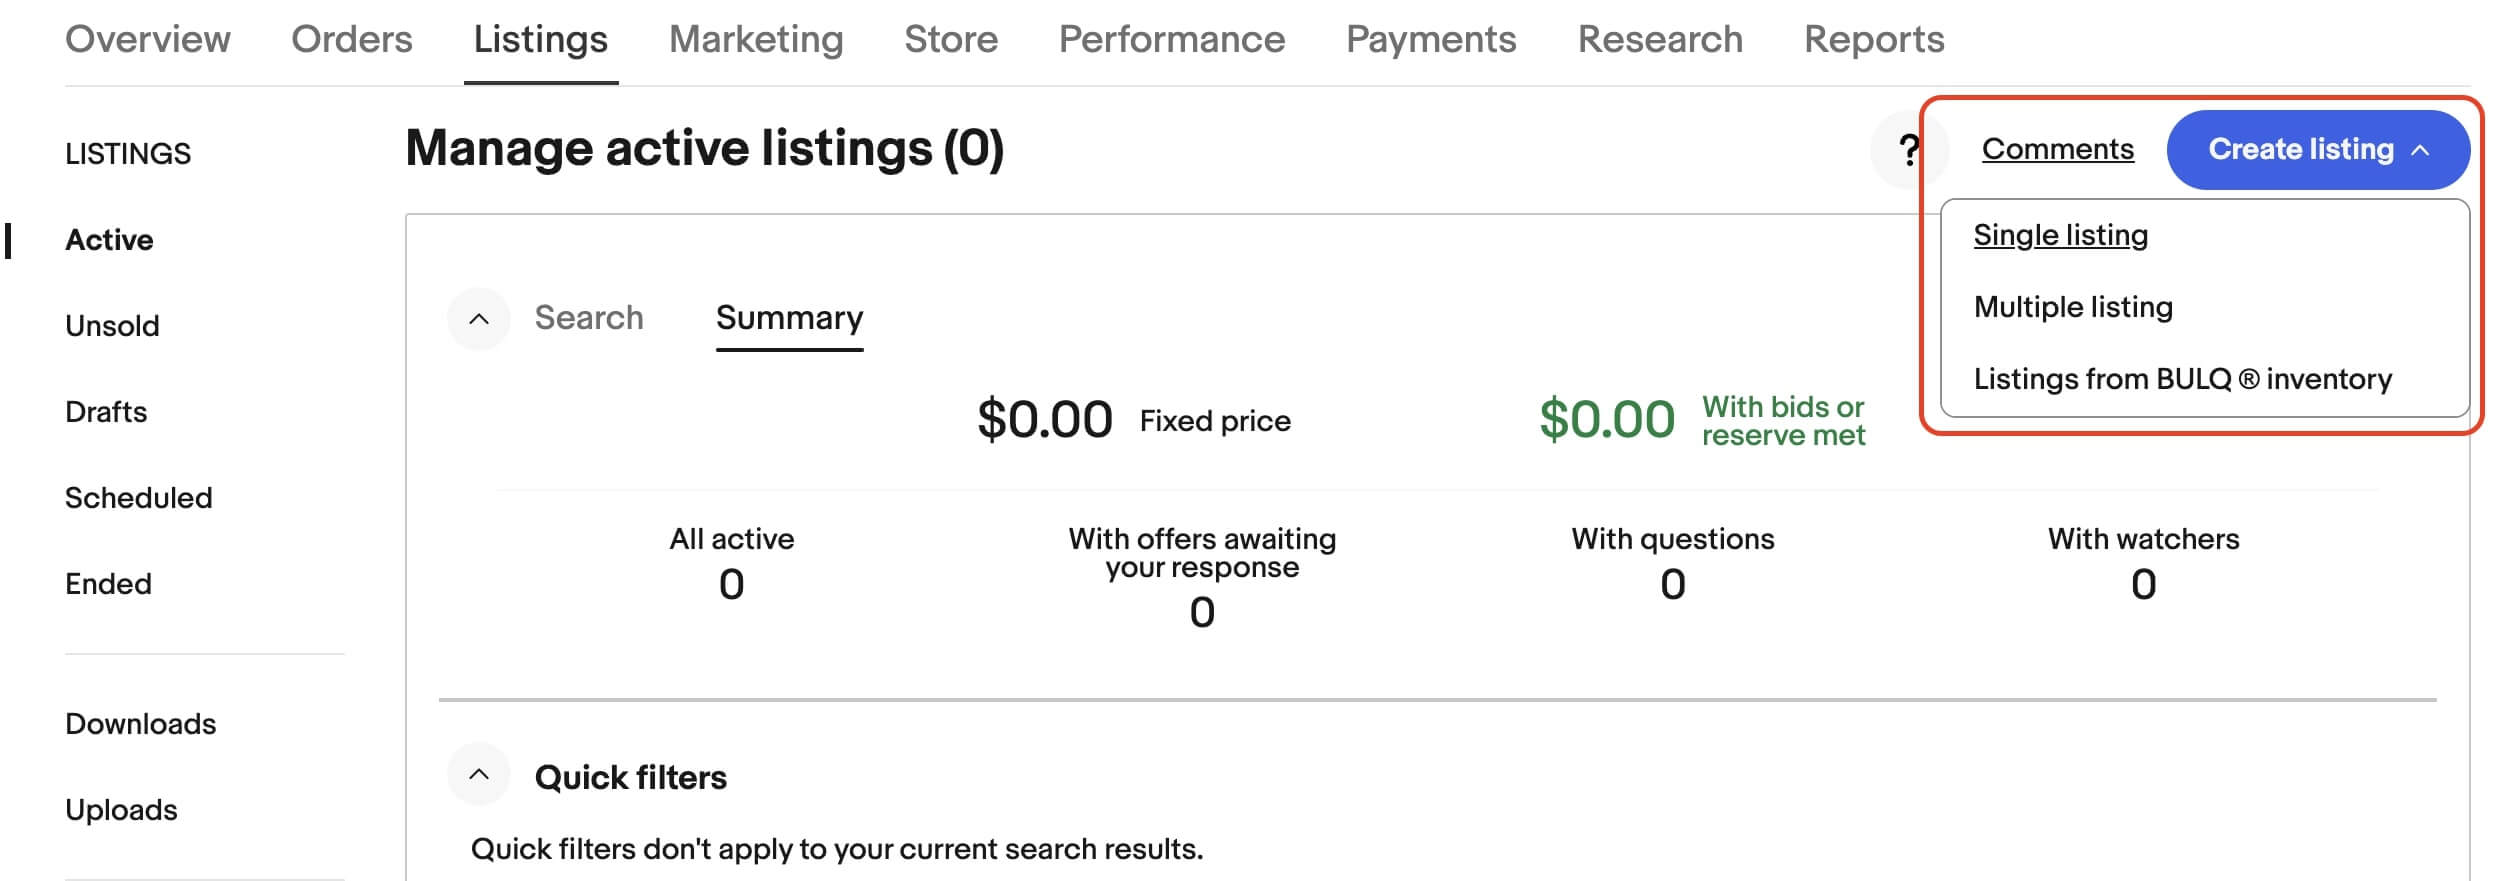 The "Listings" menu in the eBay Seller Hub. The section "Create Listing" is highlighted in red.